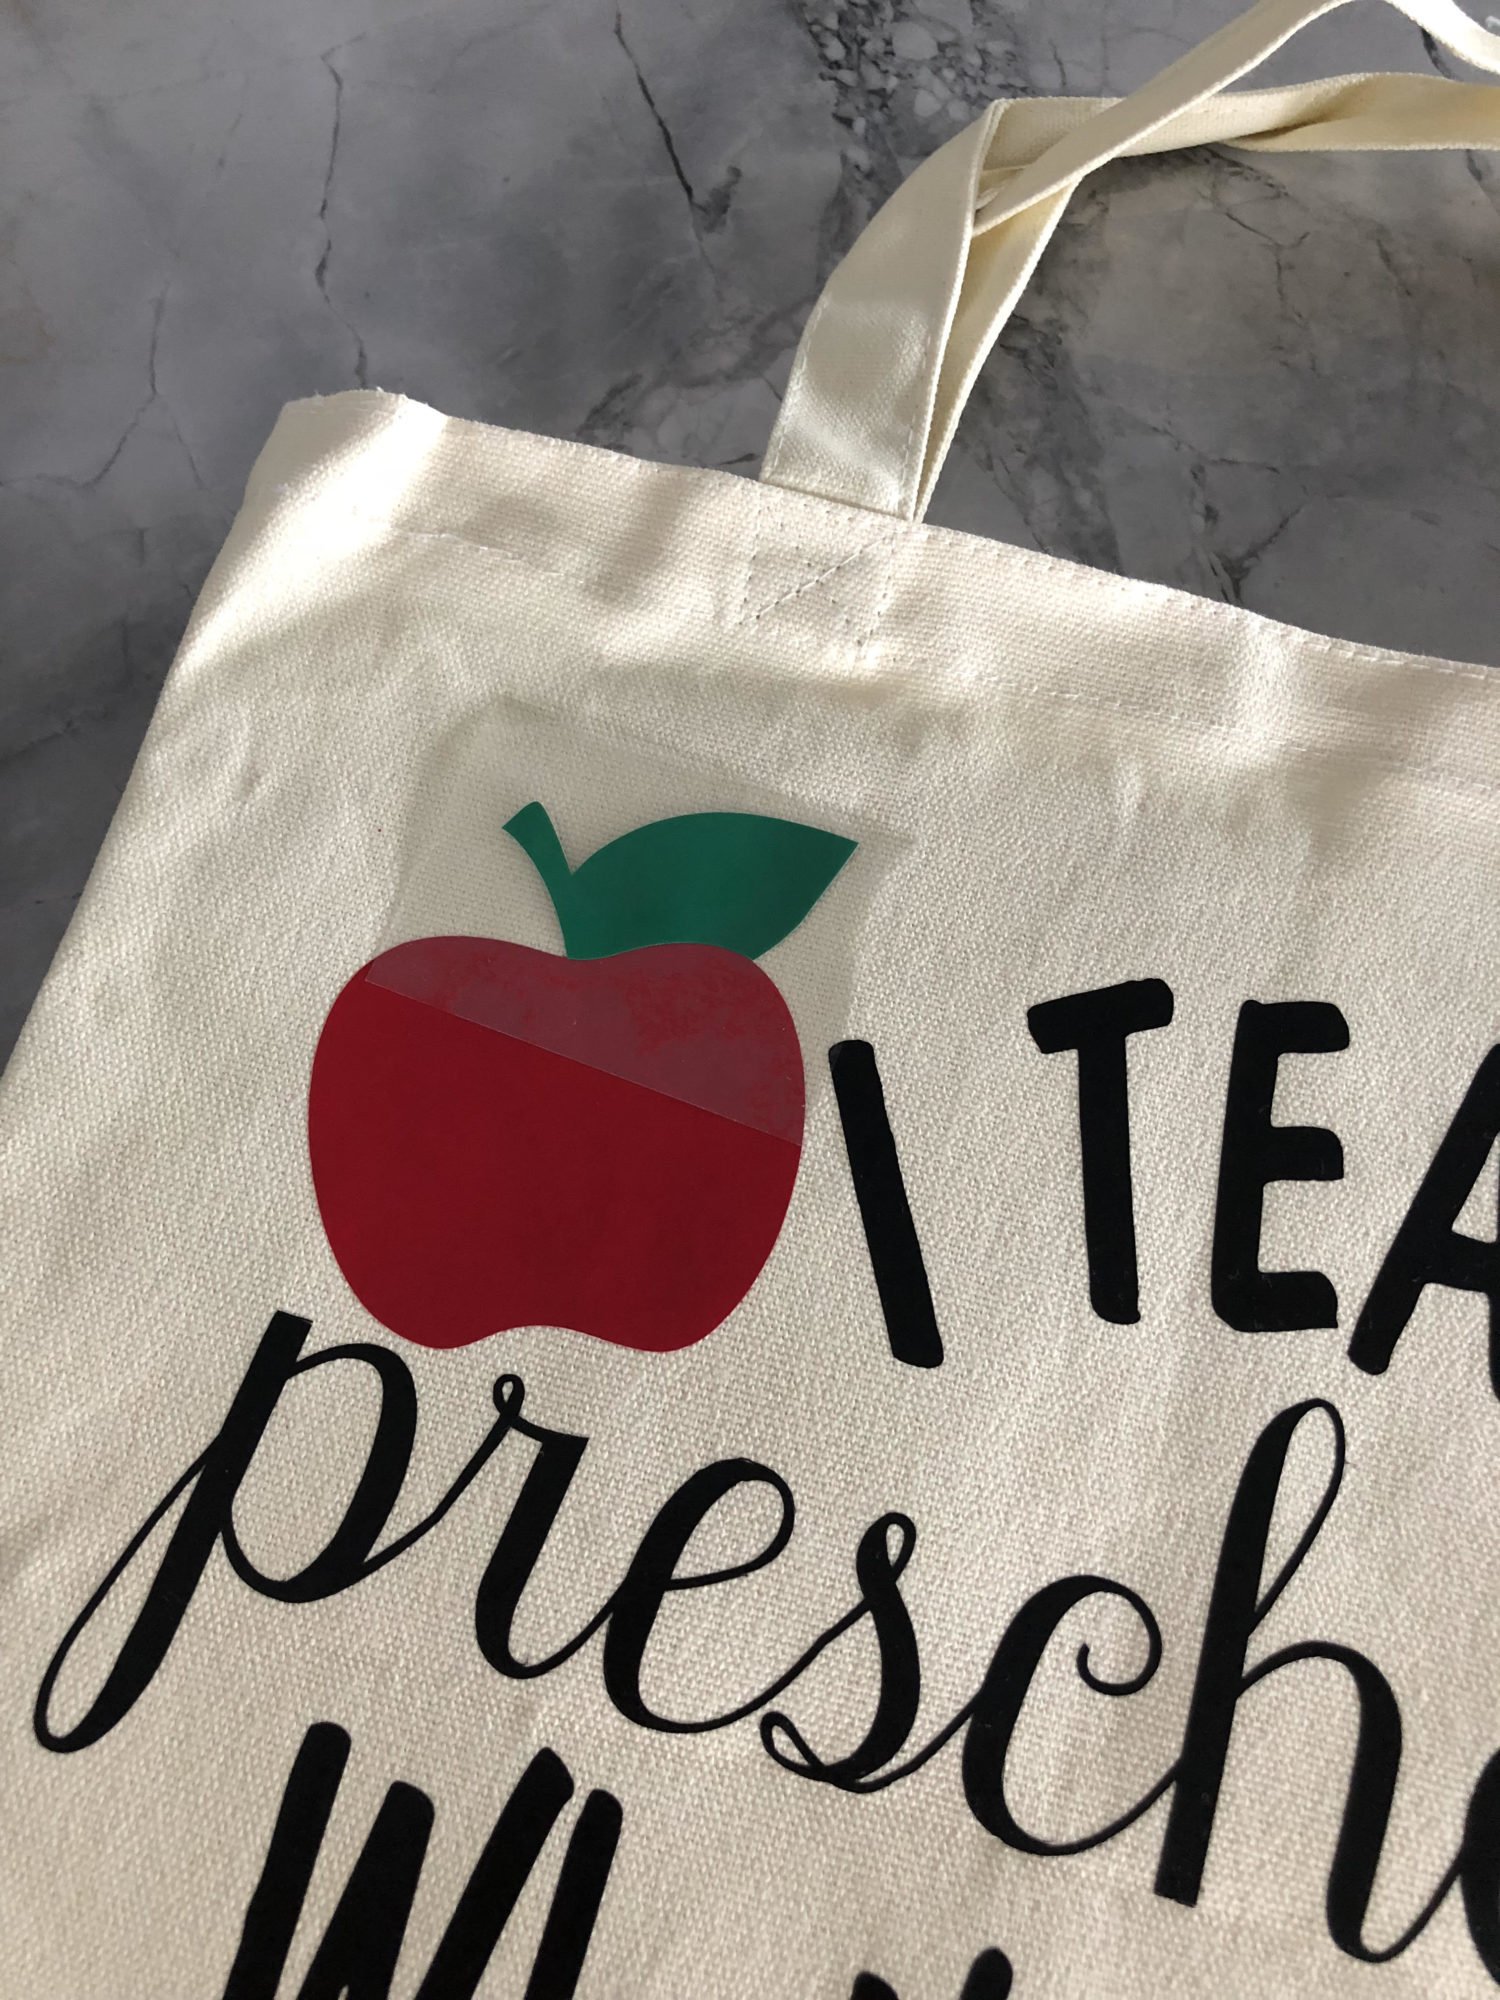 's Your Superpower? DIY Tote Bag